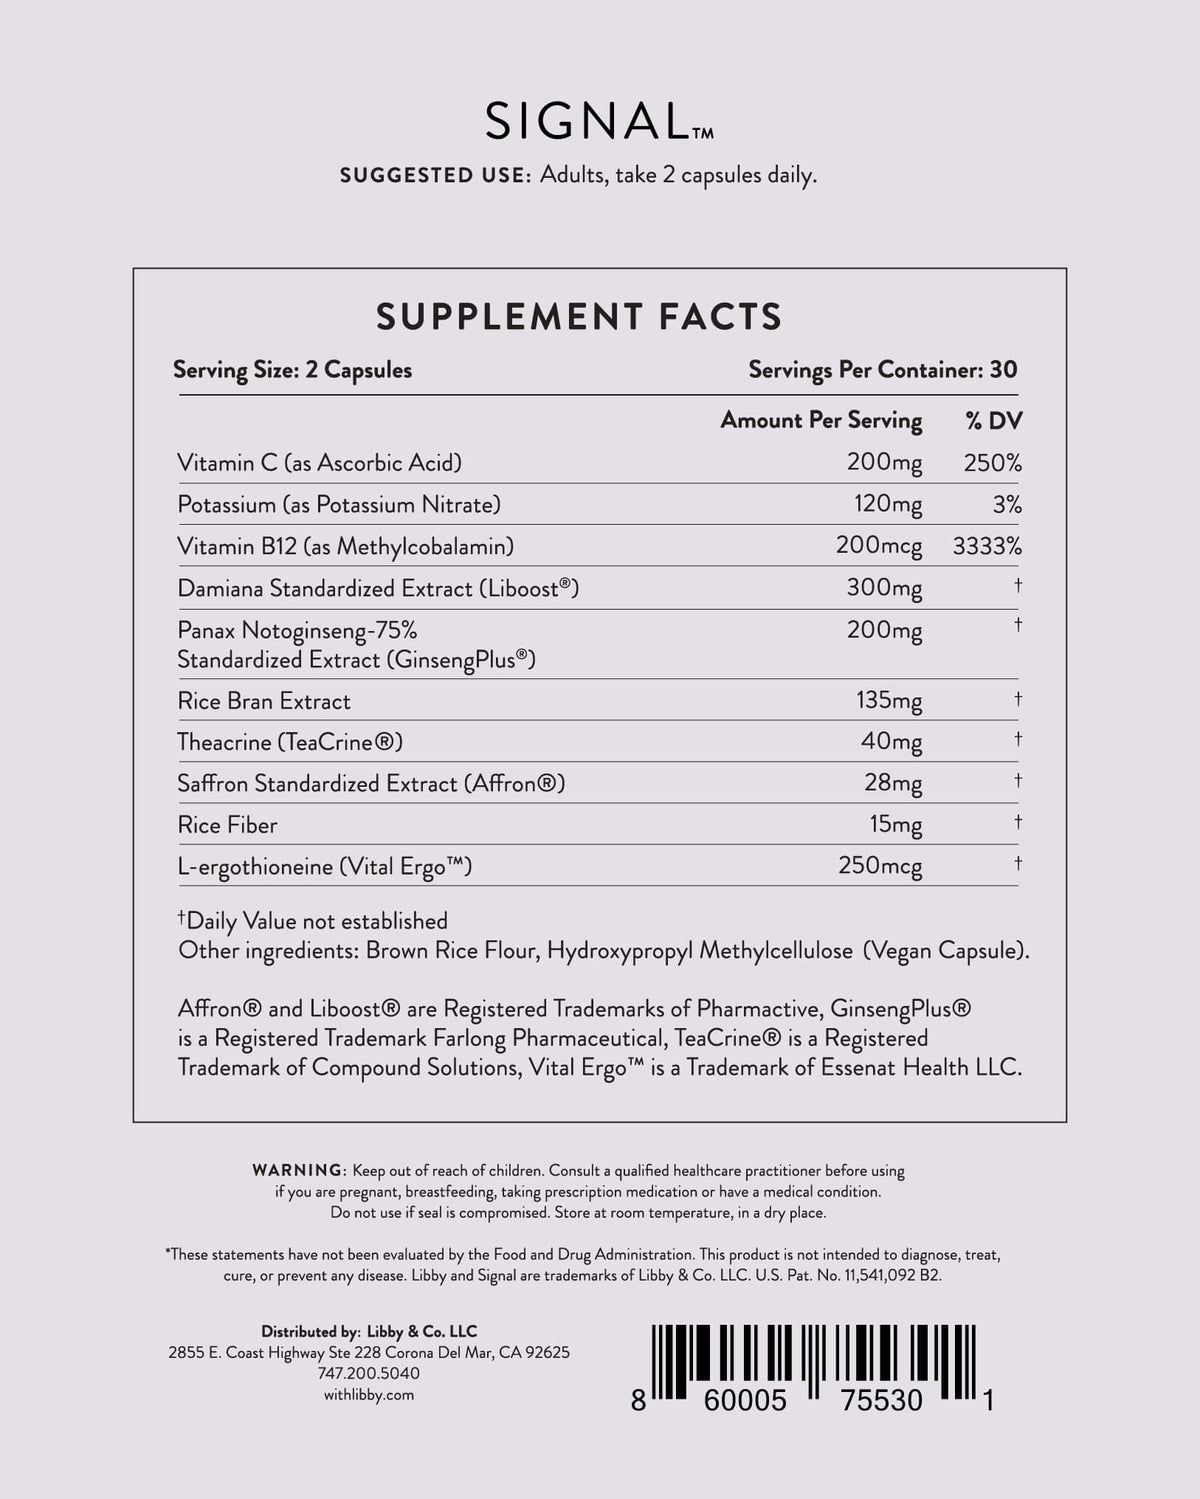 List of ingredients for Signal supplement from Libby.